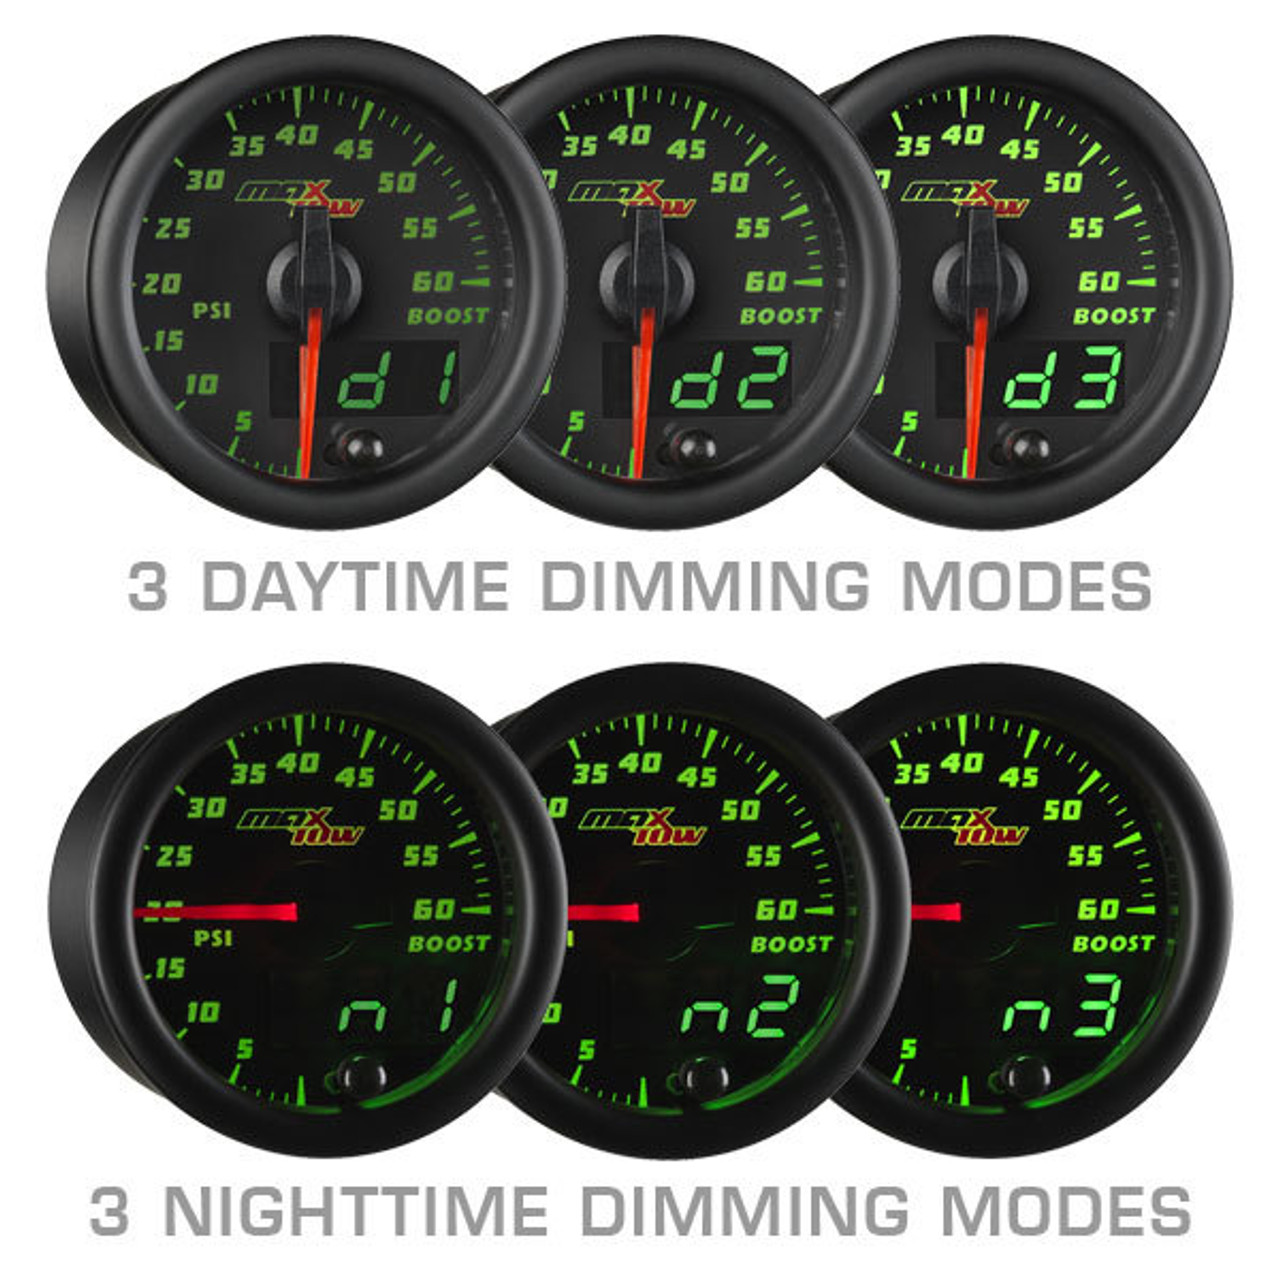 https://cdn11.bigcommerce.com/s-ky240q9geo/images/stencil/1280x1280/products/6930/16471/Black_Green_MaxTow_Gauge_Daytime_Nighttime_Dimming_Gallery__48496.1492537845.1280.1280__14746.1492544269.jpg?c=2